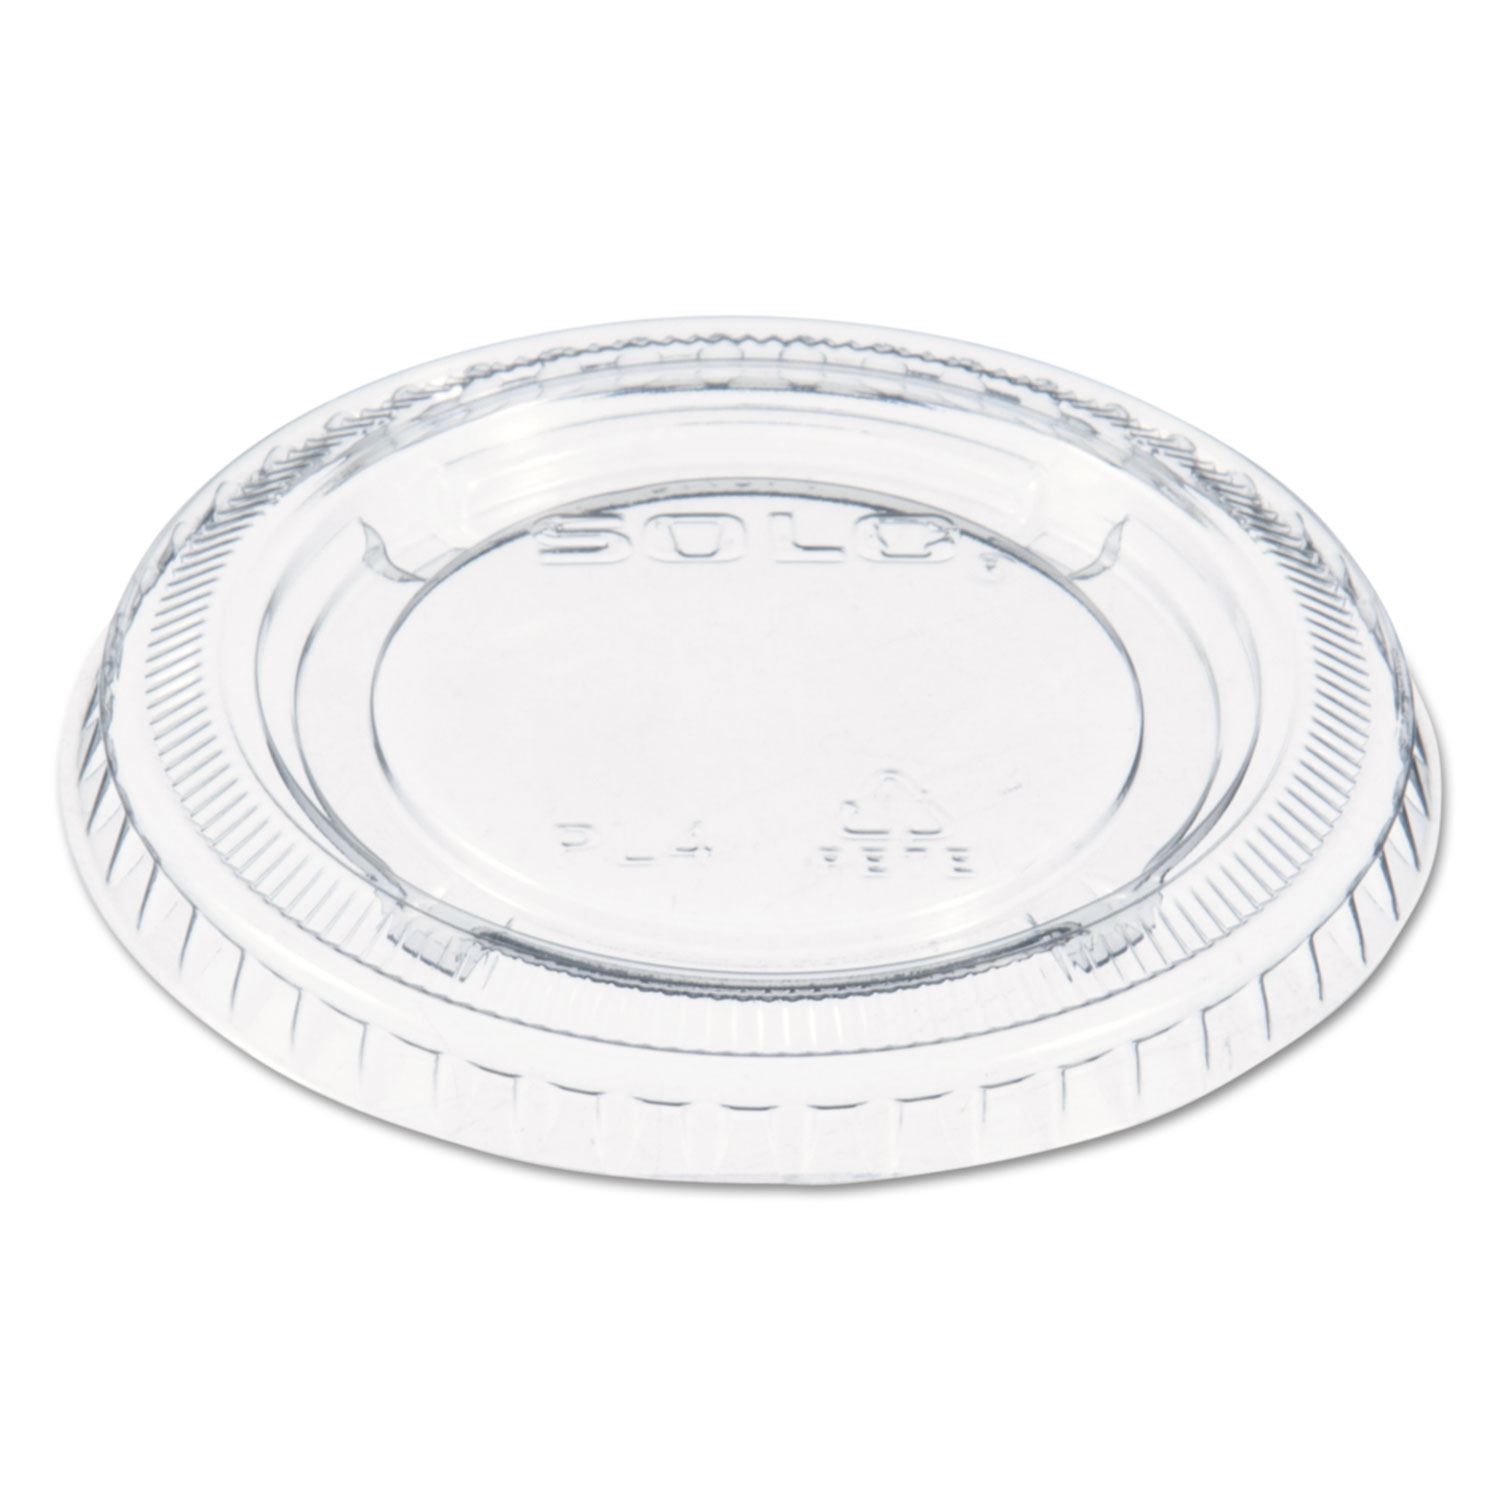 No-Slot Plastic Cup Lids, 3.25-9oz Cups, Clear, 125/Sleeve, 20 Sleeves/Carton